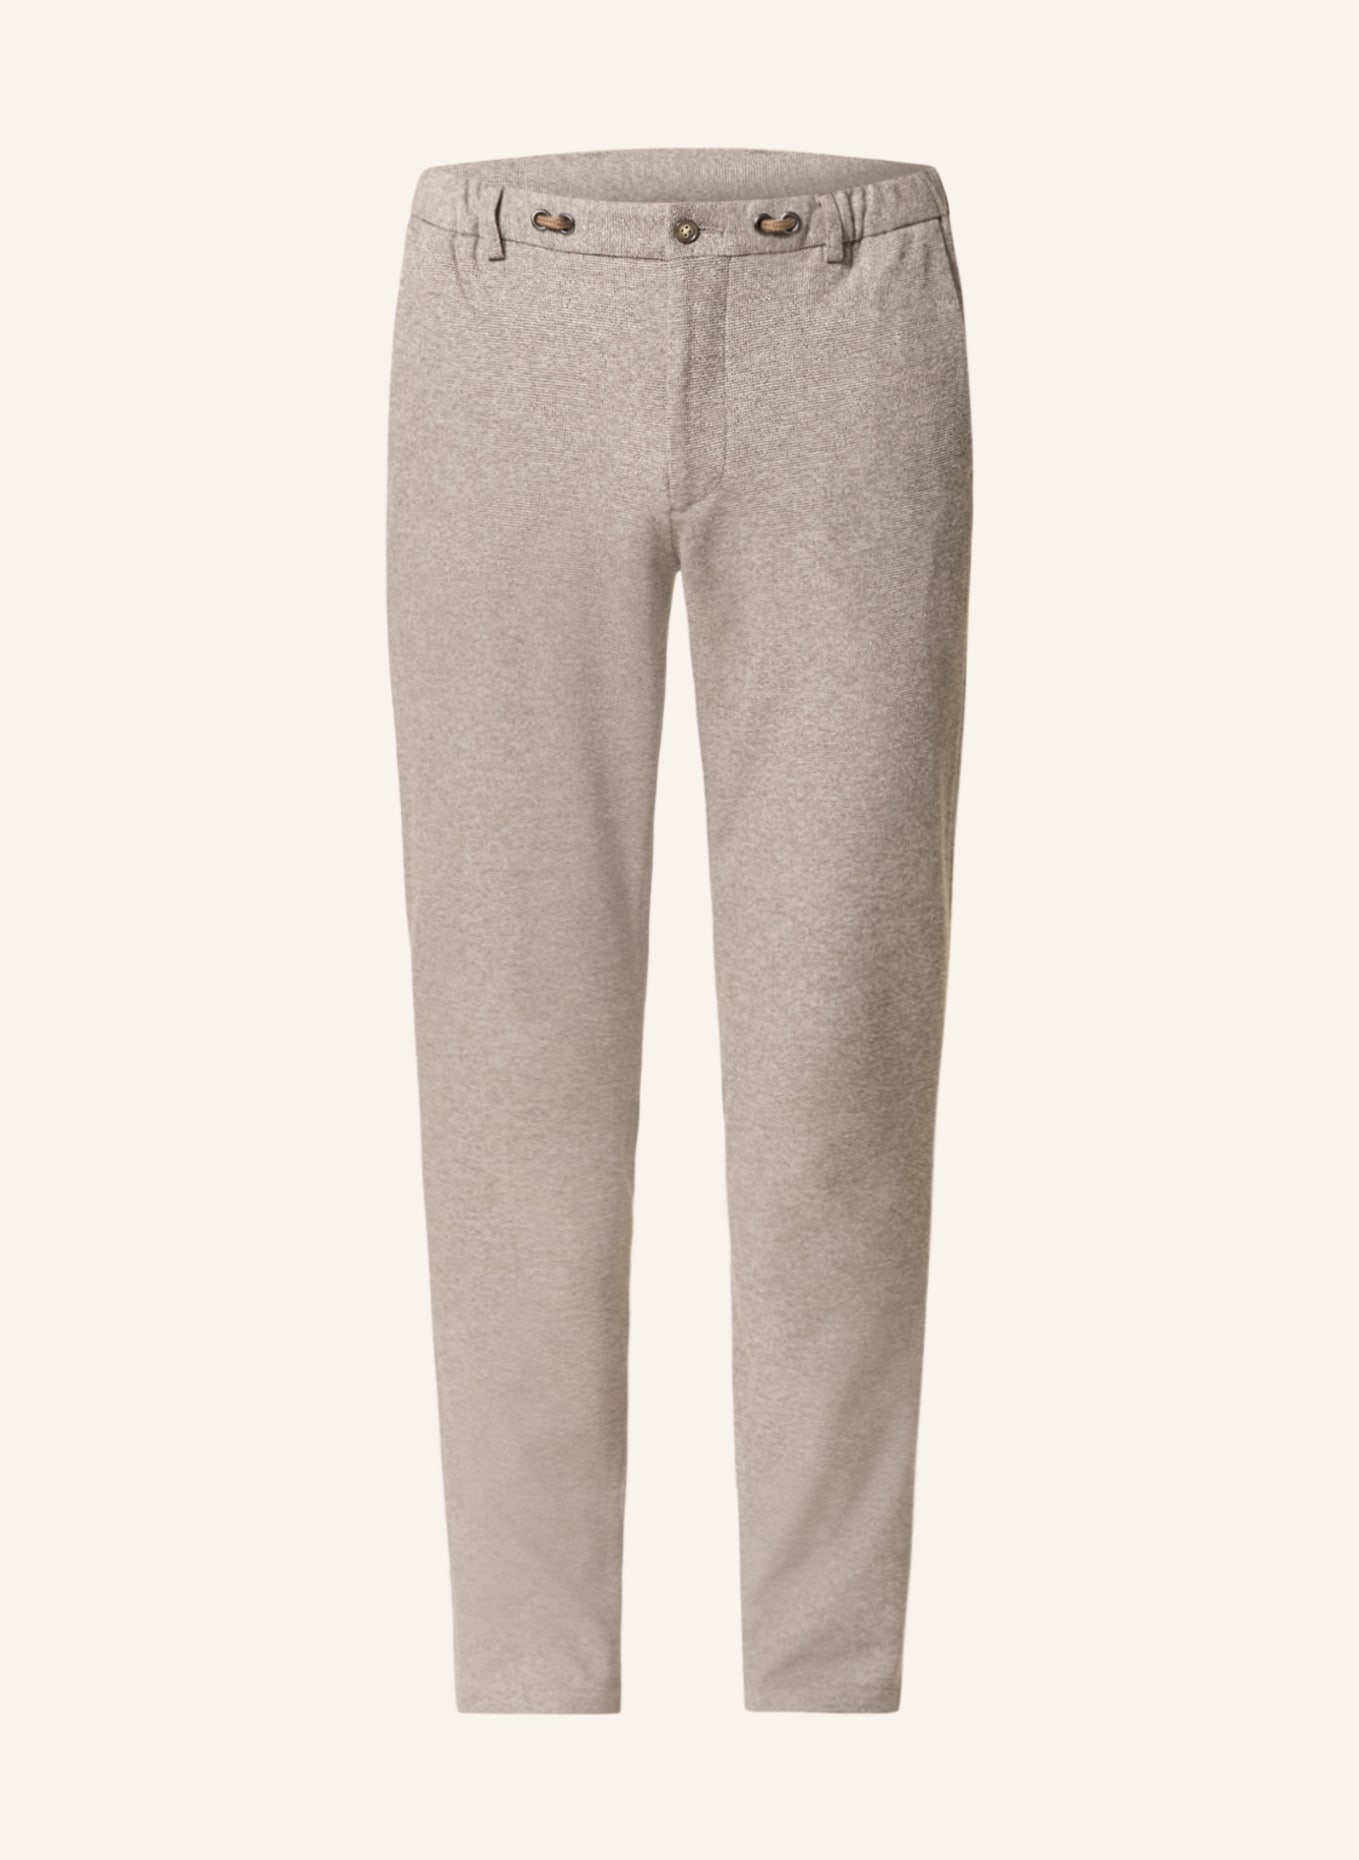 PAUL Suit trousers in jogger style extra slim fit, Color: BEIGE/ CREAM (Image 1)